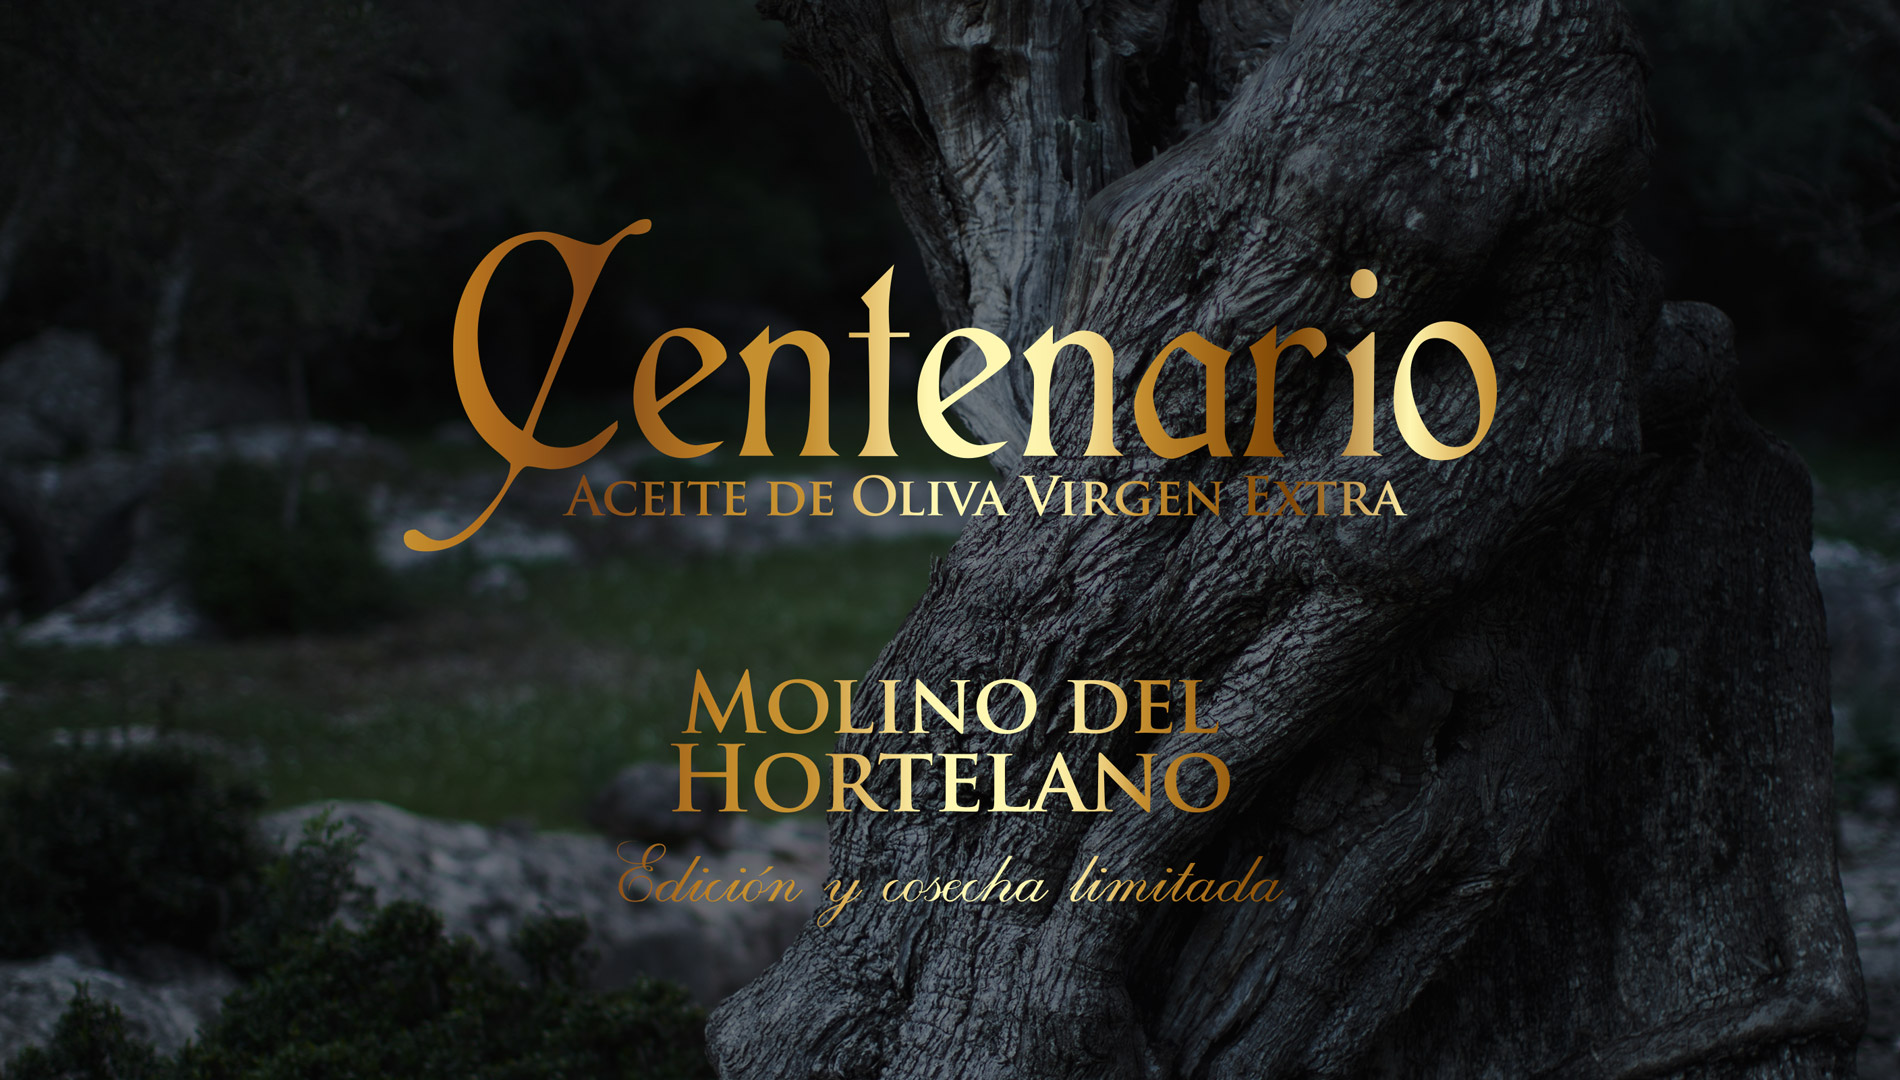 Portfolio of graphic and creative design works of extra virgin olive oil label design and packaging for MOLINO DEL HORTELANO gourmet version limited edition